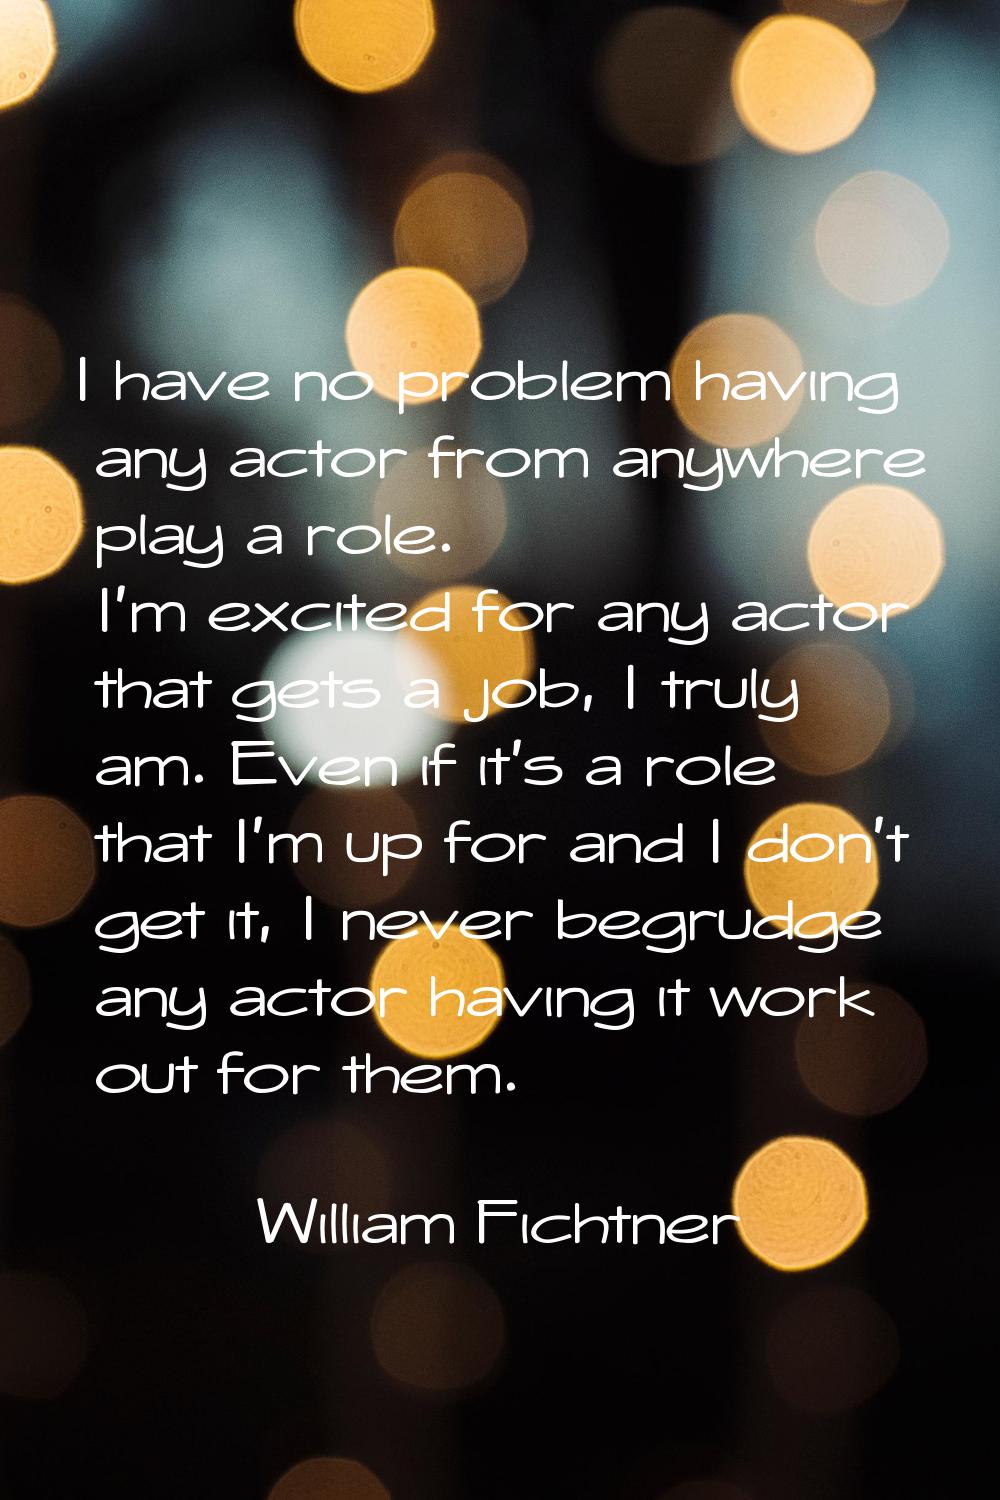 I have no problem having any actor from anywhere play a role. I'm excited for any actor that gets a